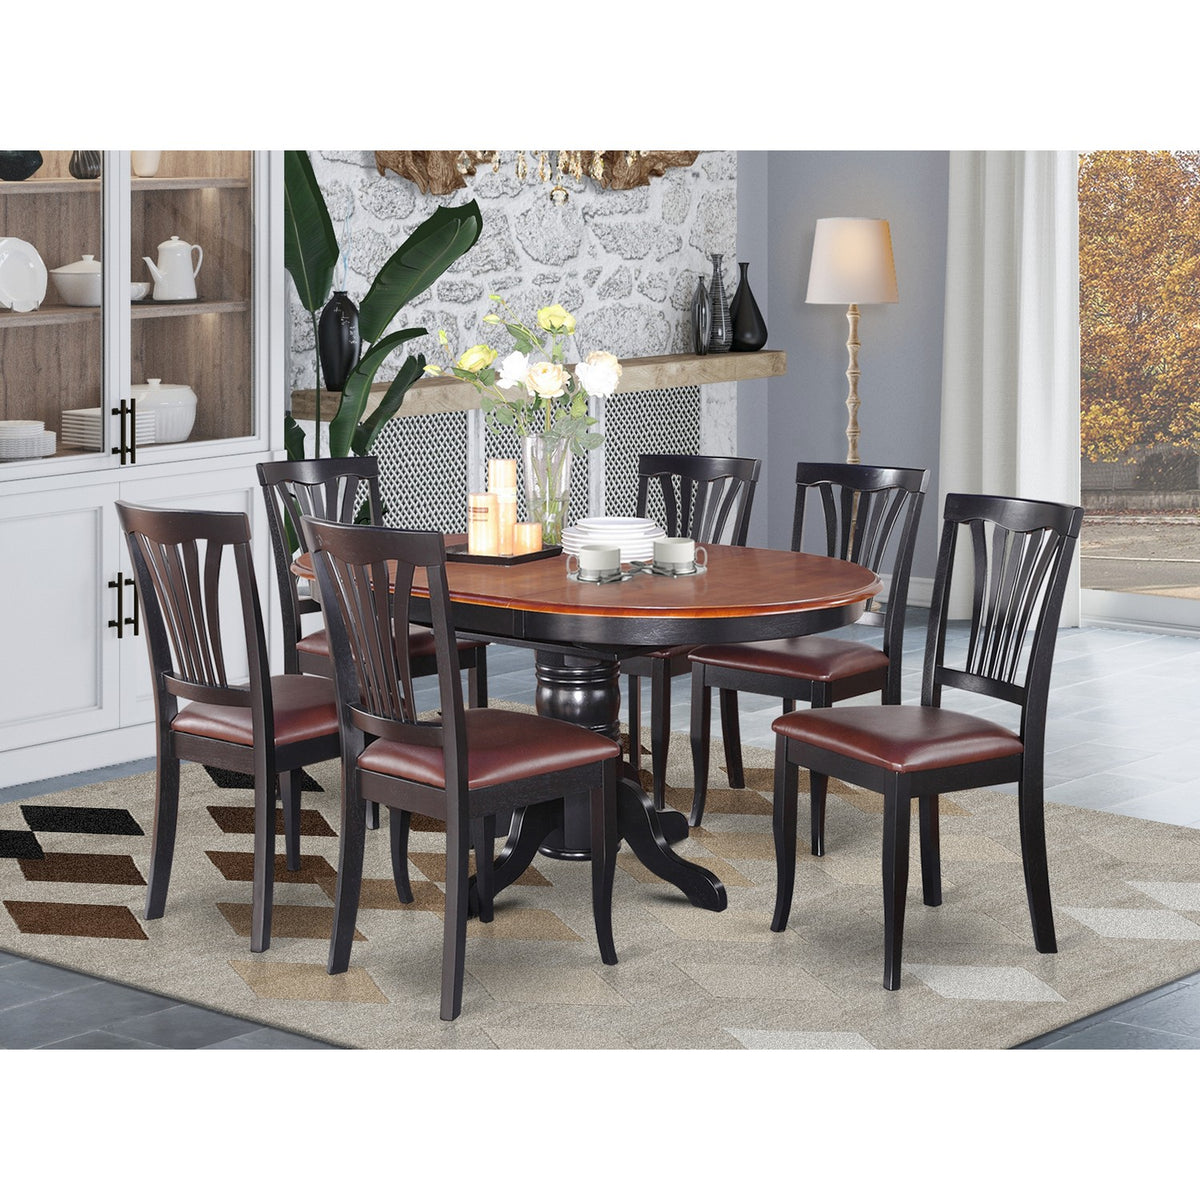 East West Furniture AVON7-BLK-LC 7 Piece Dining Table Set Consist of a – East  West Furniture Main Site